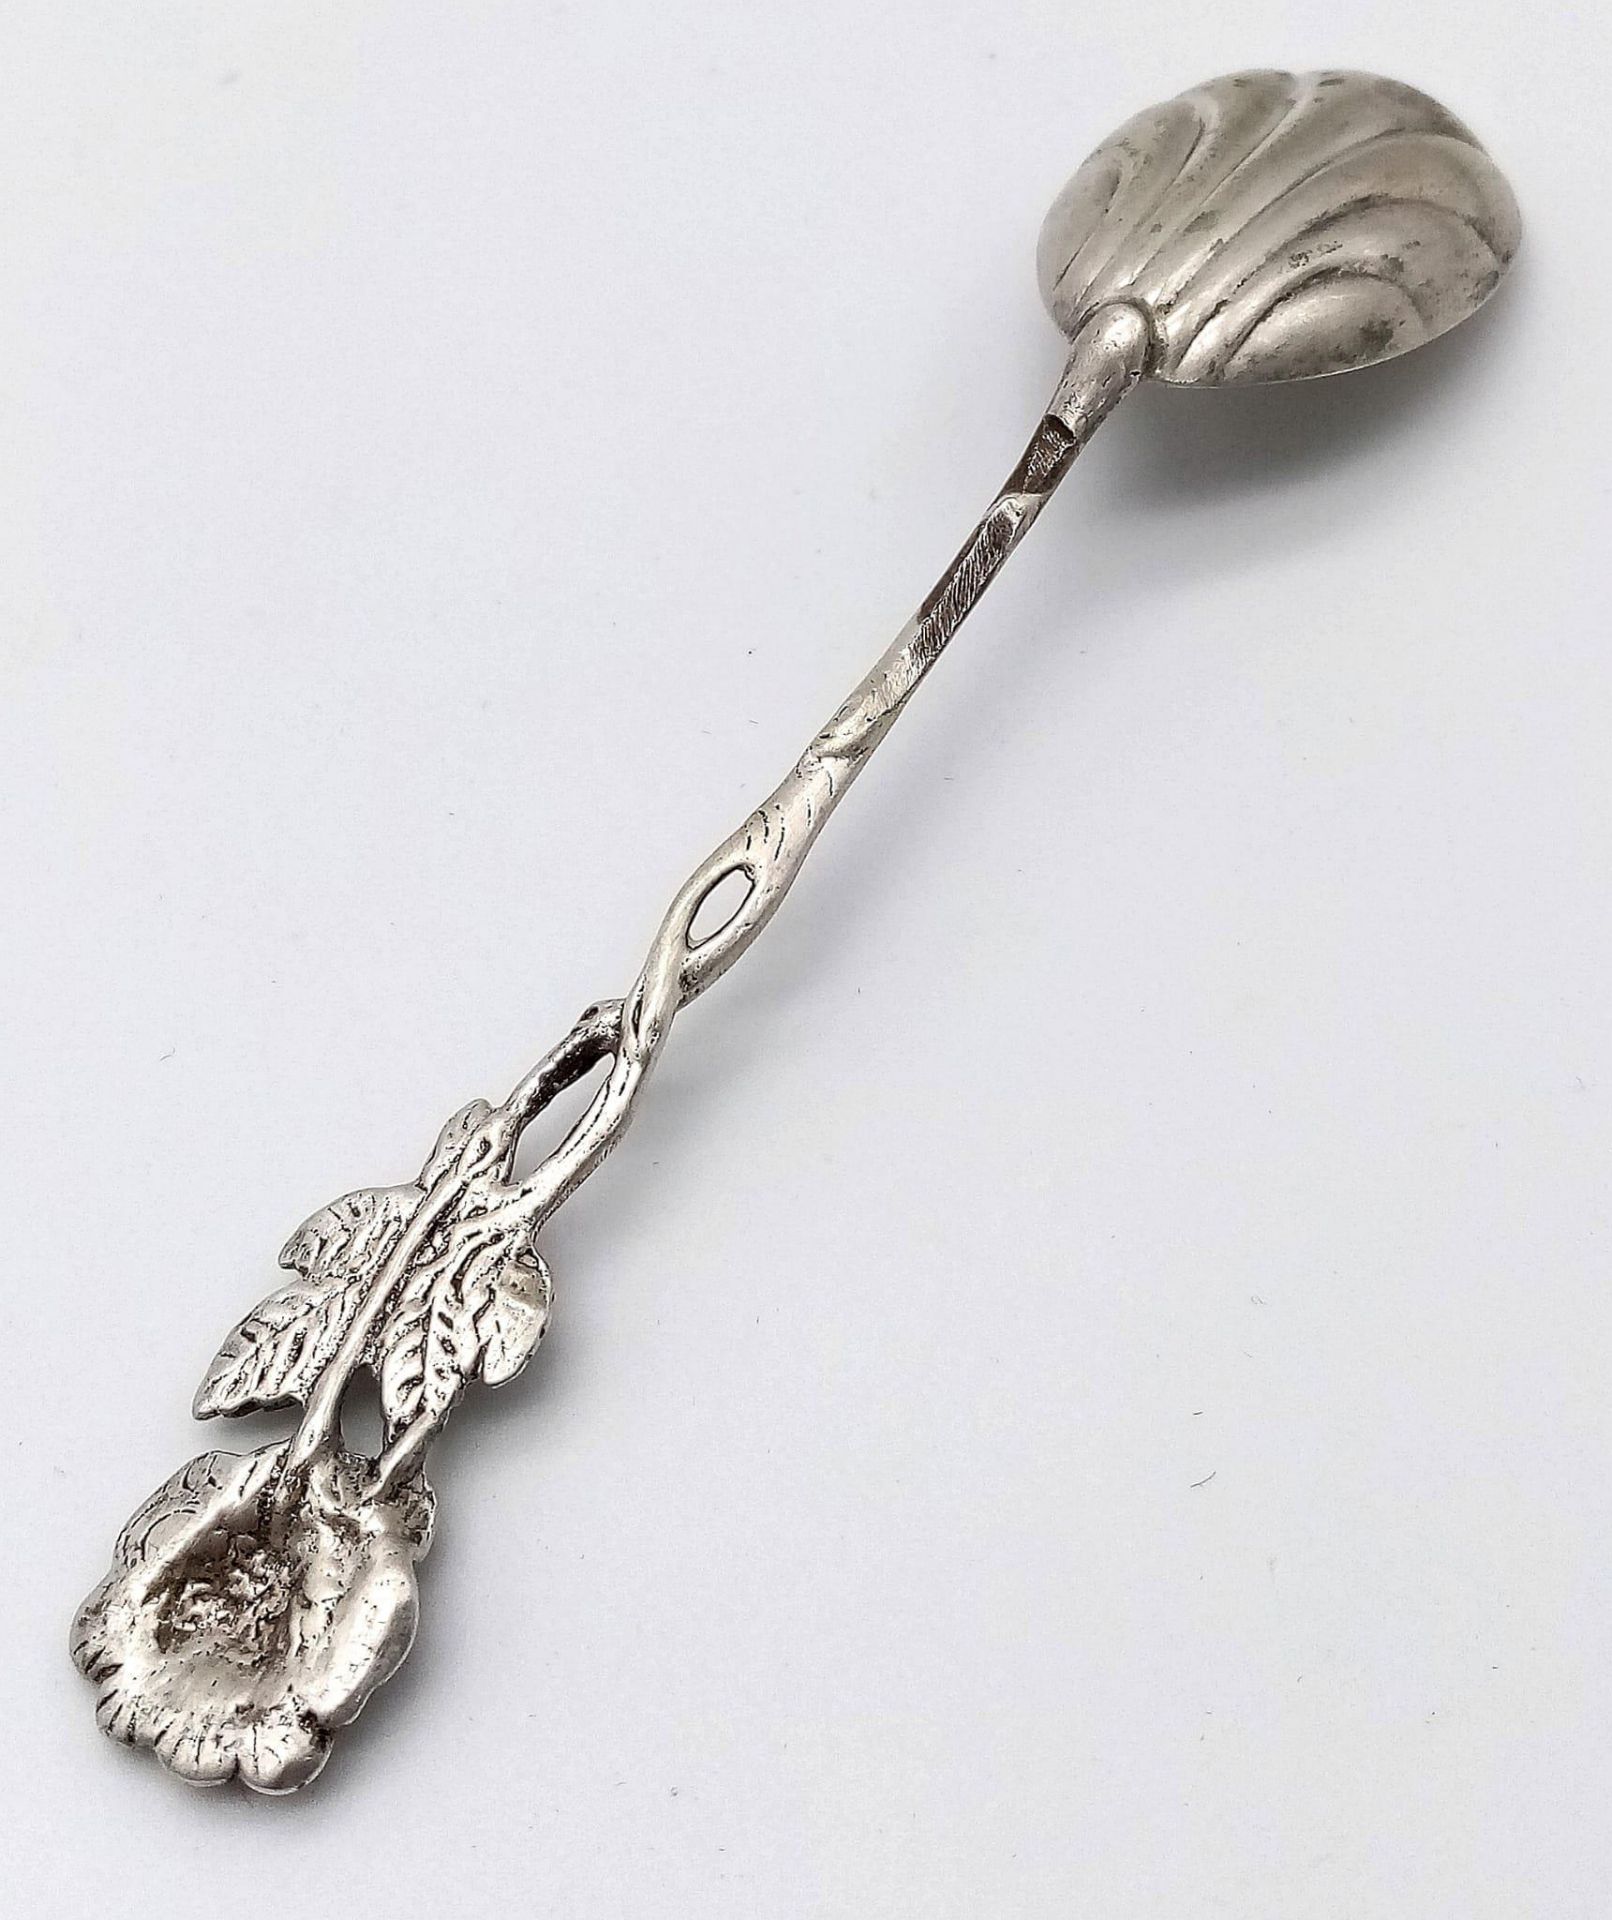 An antique silver spoon. A rose designed handle which flows down to a clam-shell like spoon bowl. - Image 4 of 4